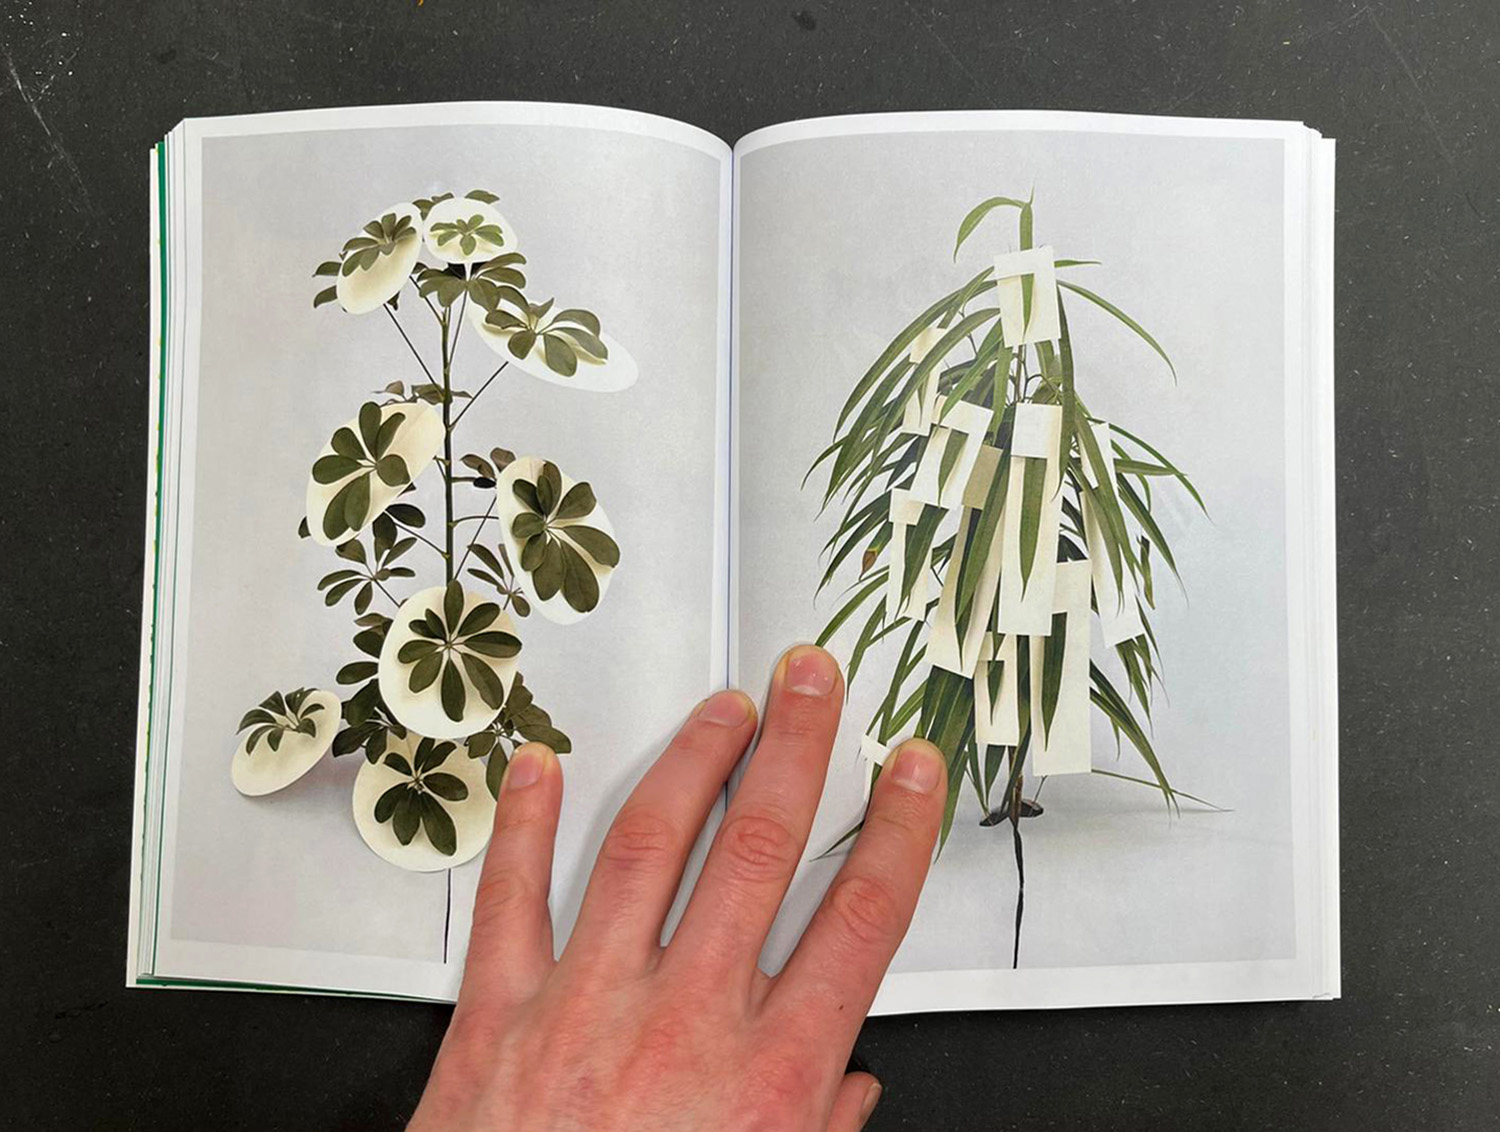 Page from Door de heg publication, with work by Ilona Plaum - Papercuts